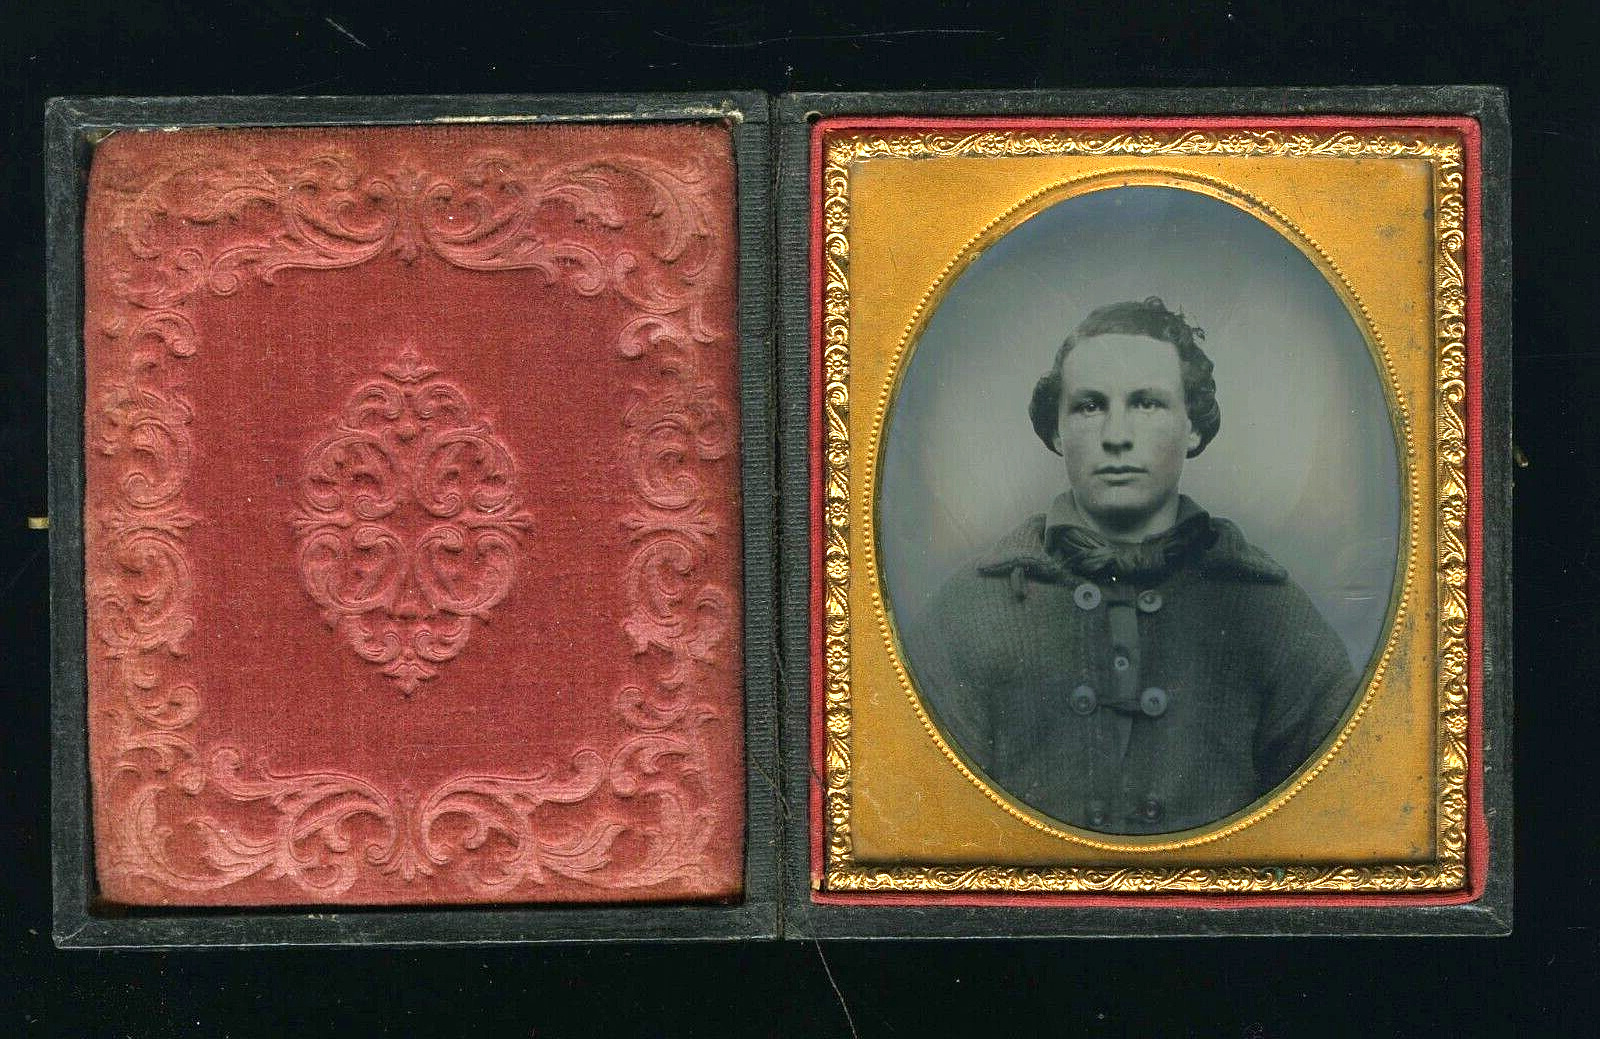 1/6 1850s Tintype Photo Handsome Young Man - Gold Miner? NEFF's PATENT